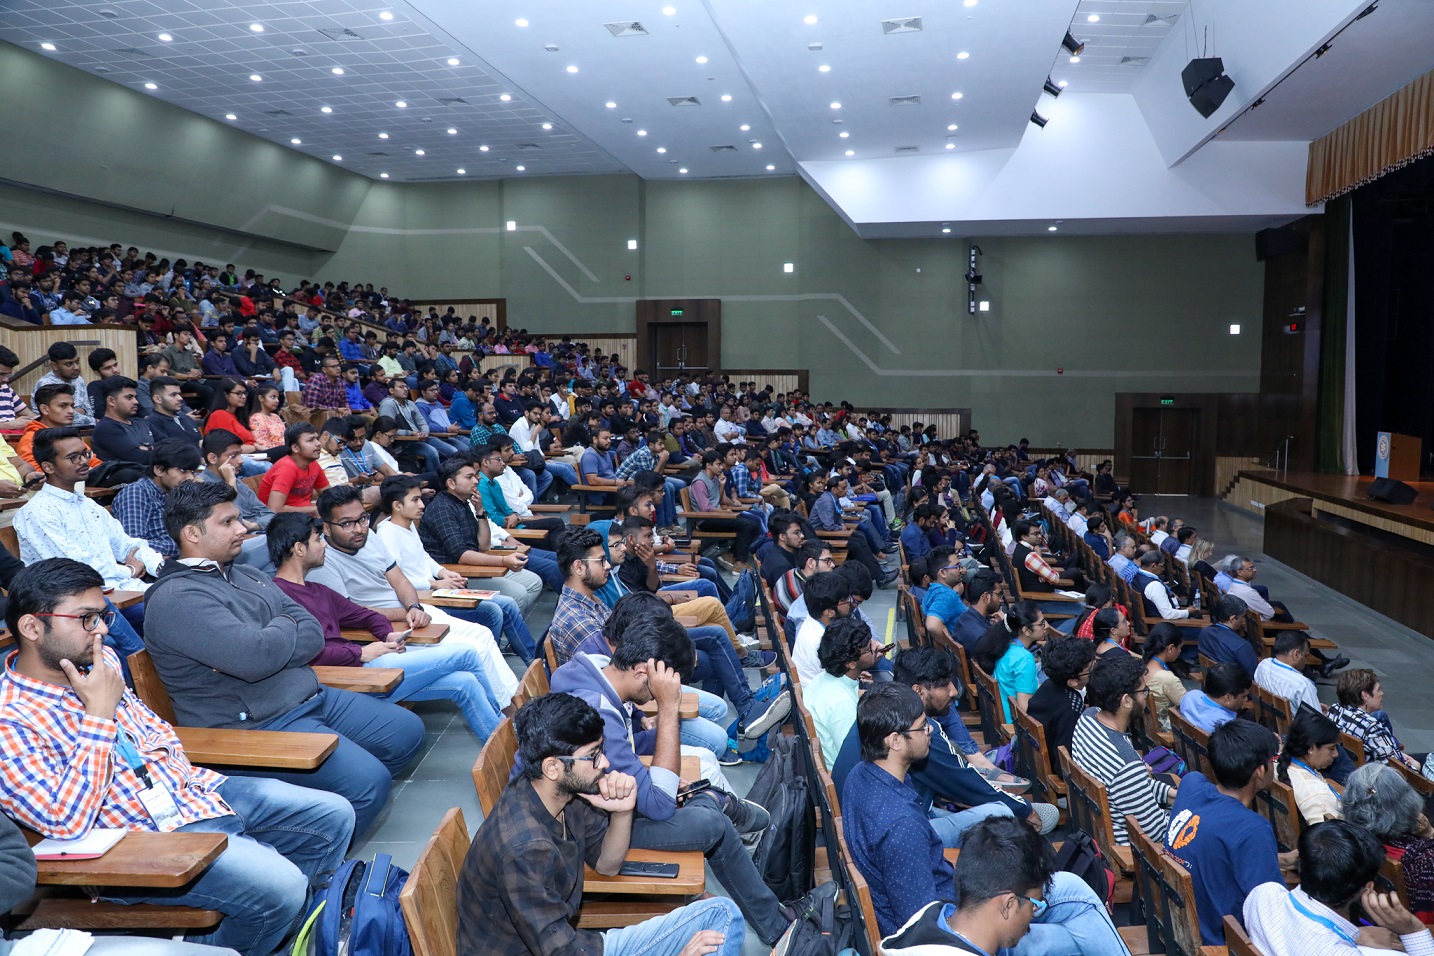 ACM- India’s Annual Event 2020 with more than 1200 participants from all over the country